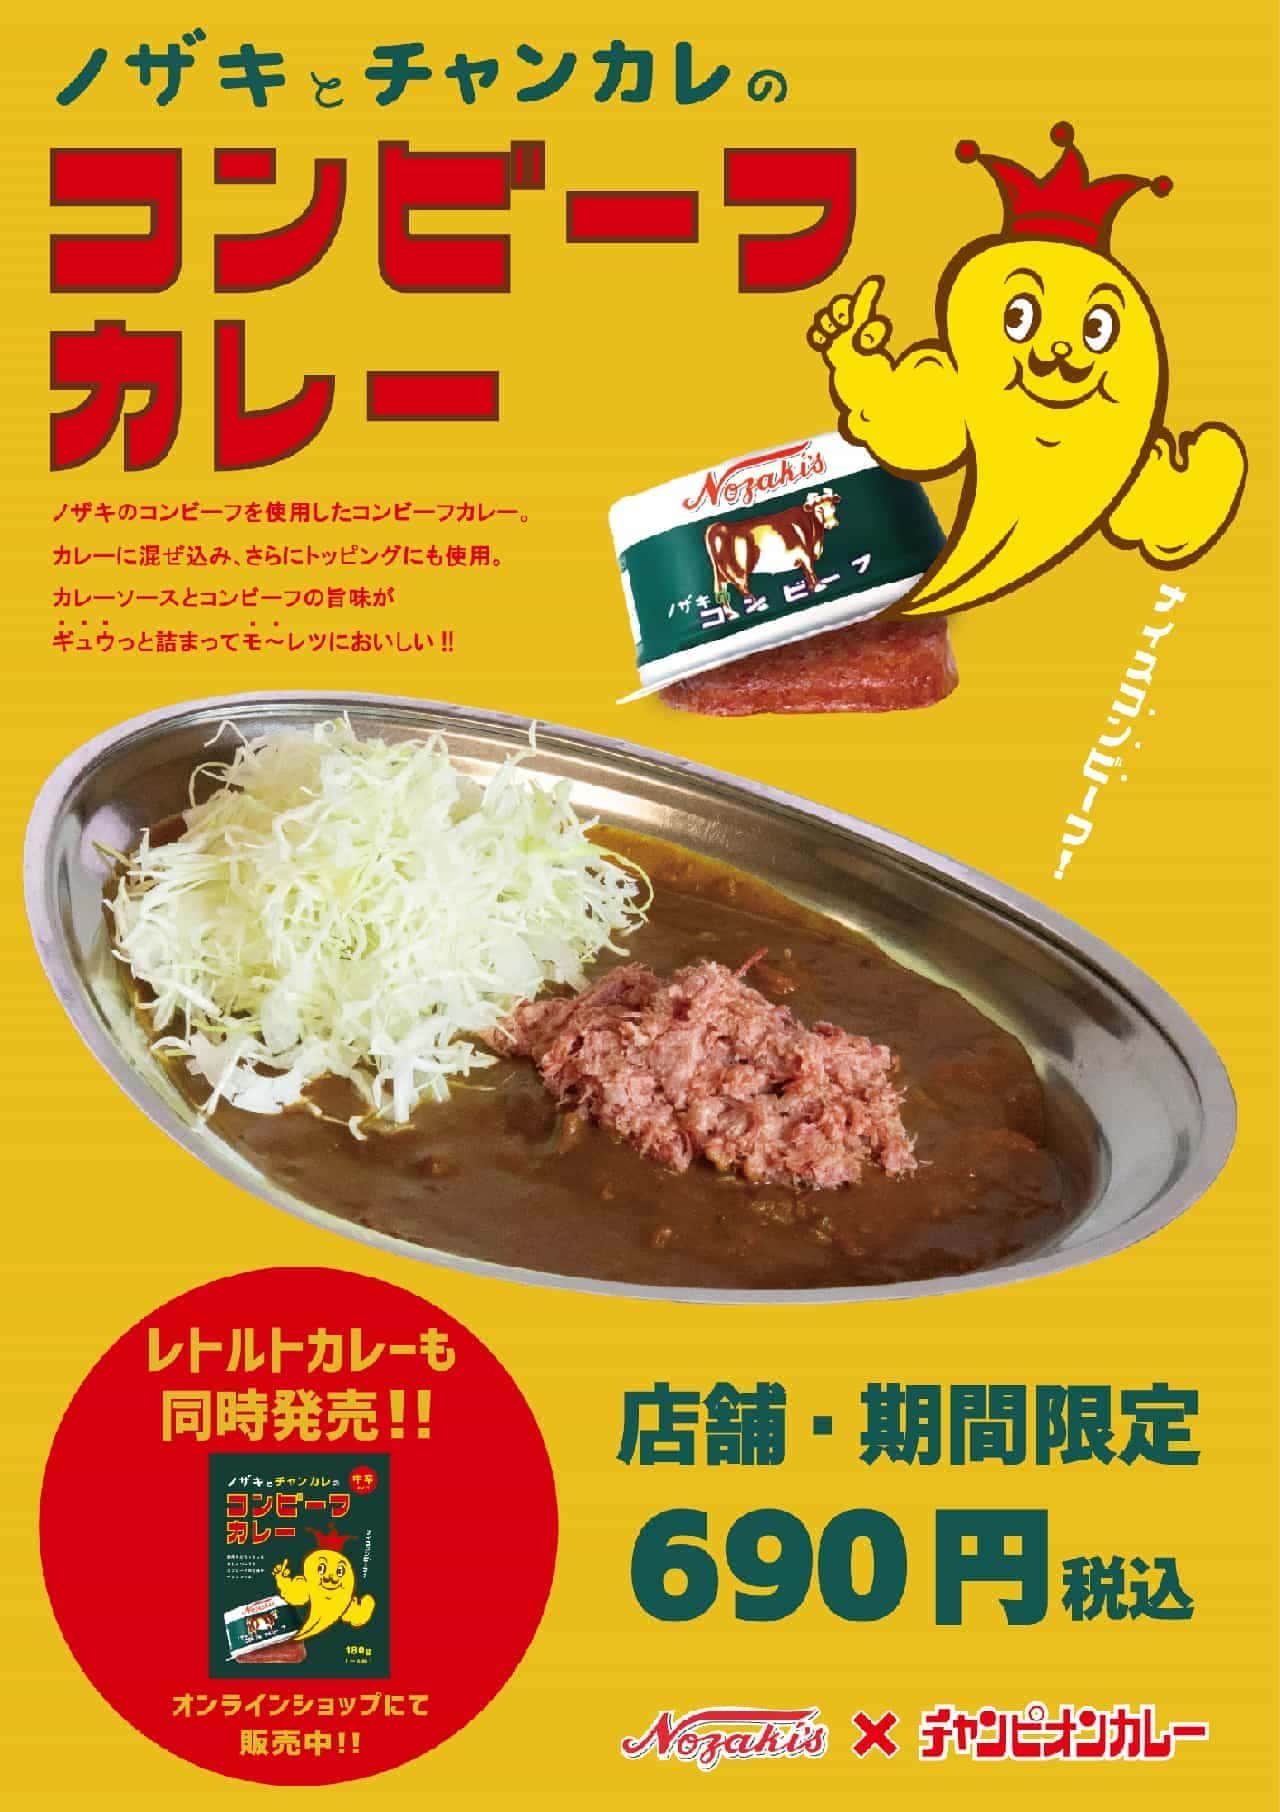 Corned beef curry with Nozaki and Chancare